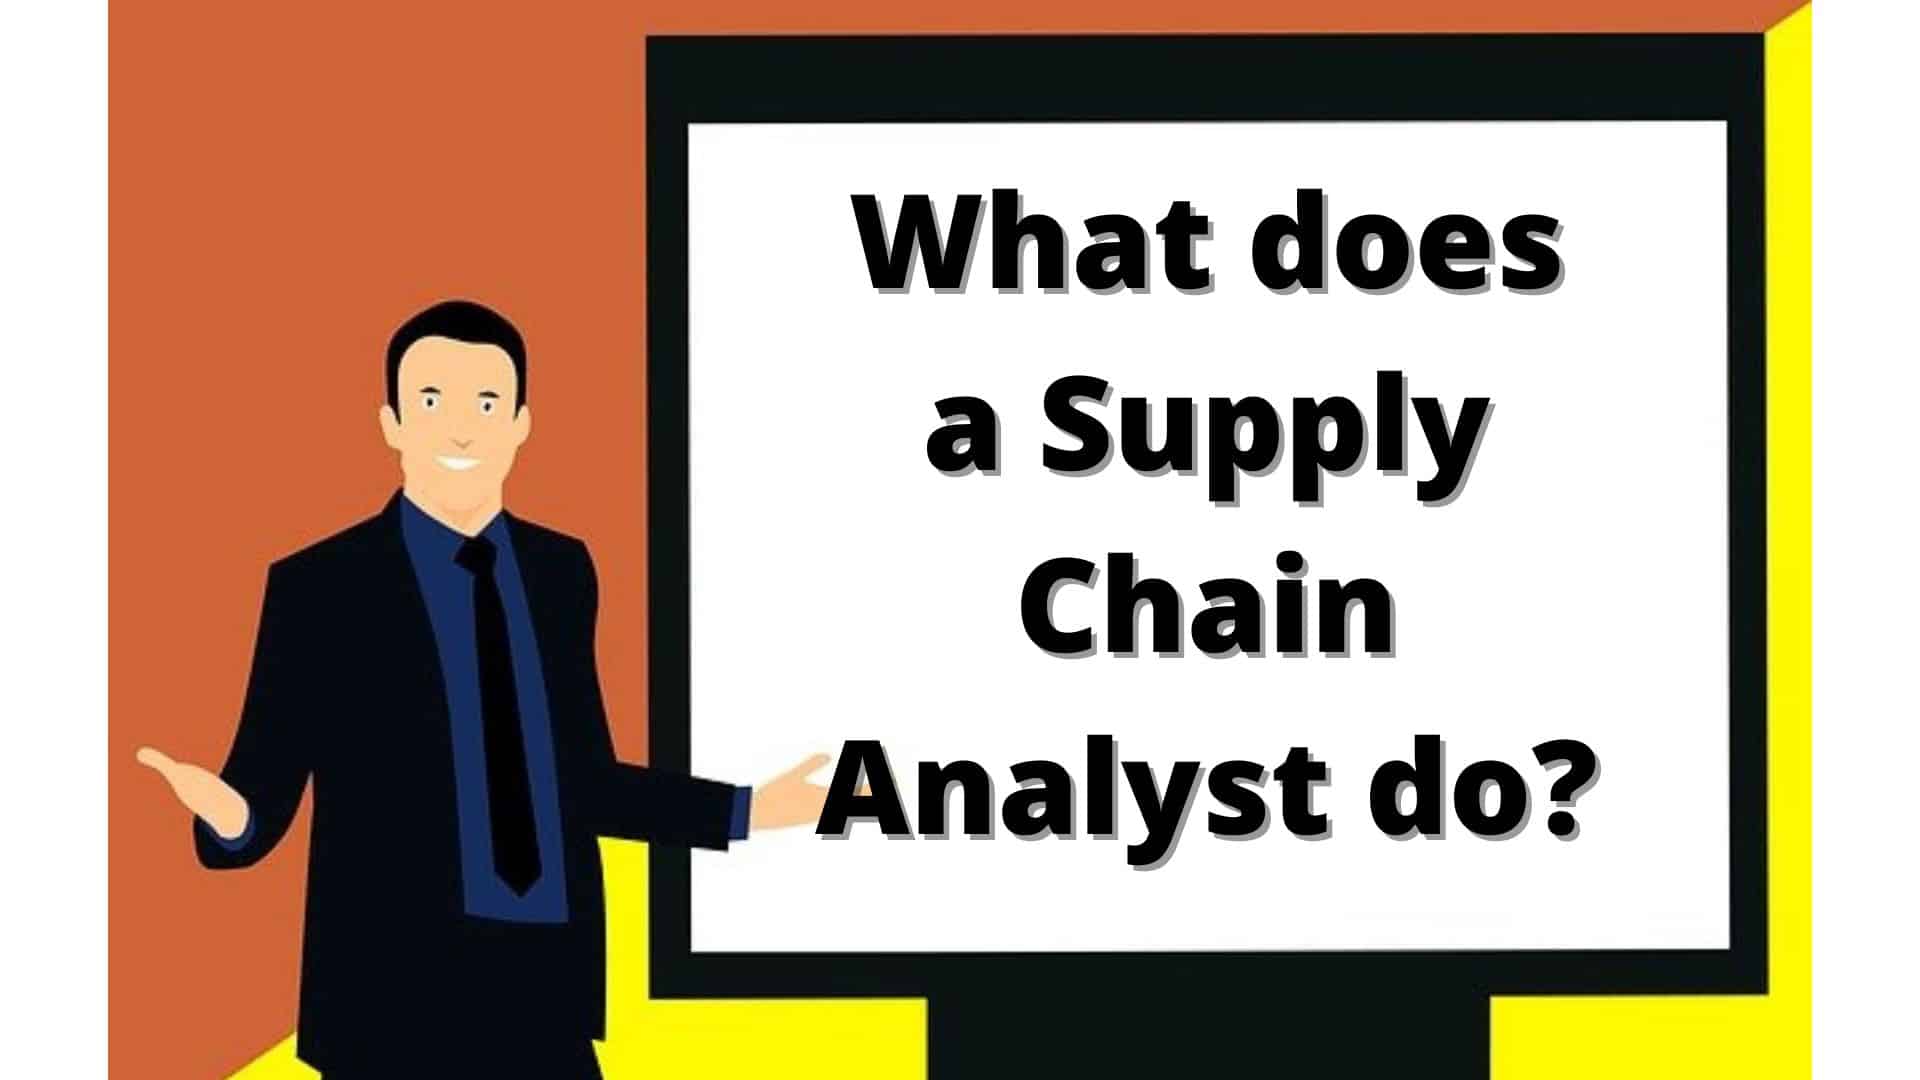 What does a supply chain analyst do?